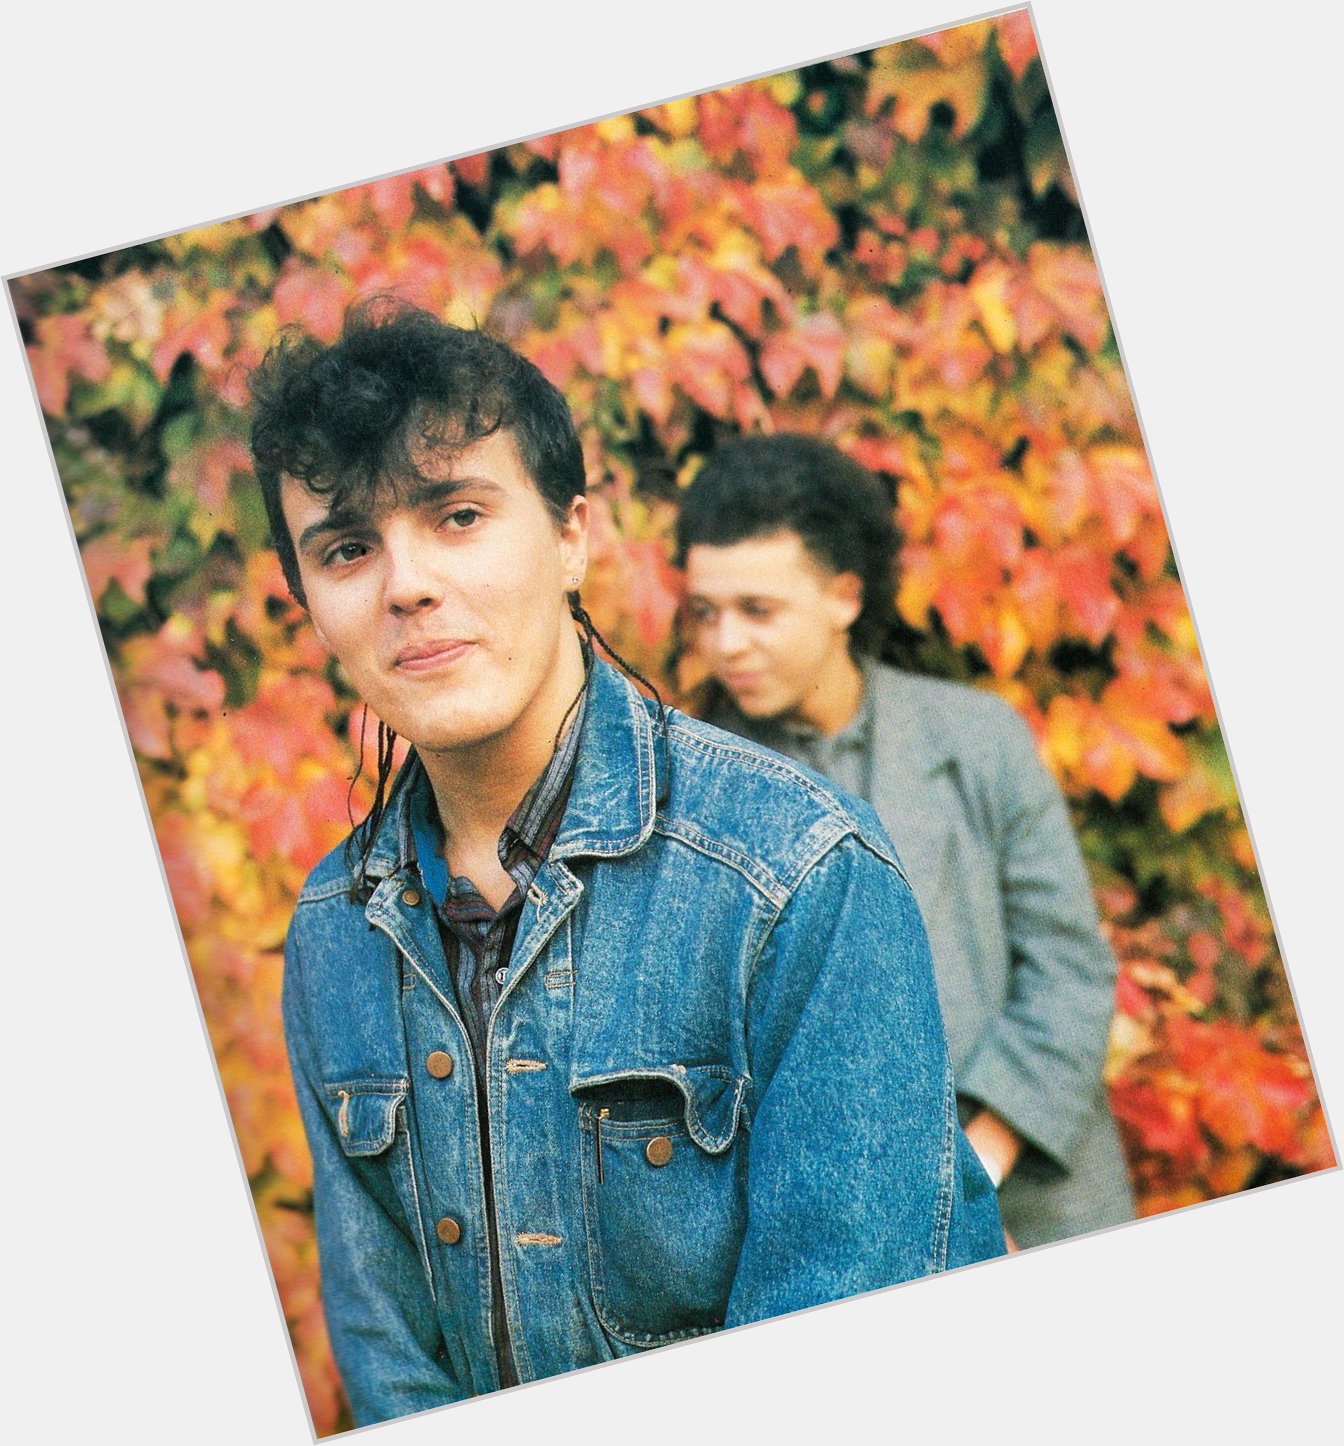 Happy 61st birthday to Curt Smith. 

What s your favorite Tears For Fears song? 